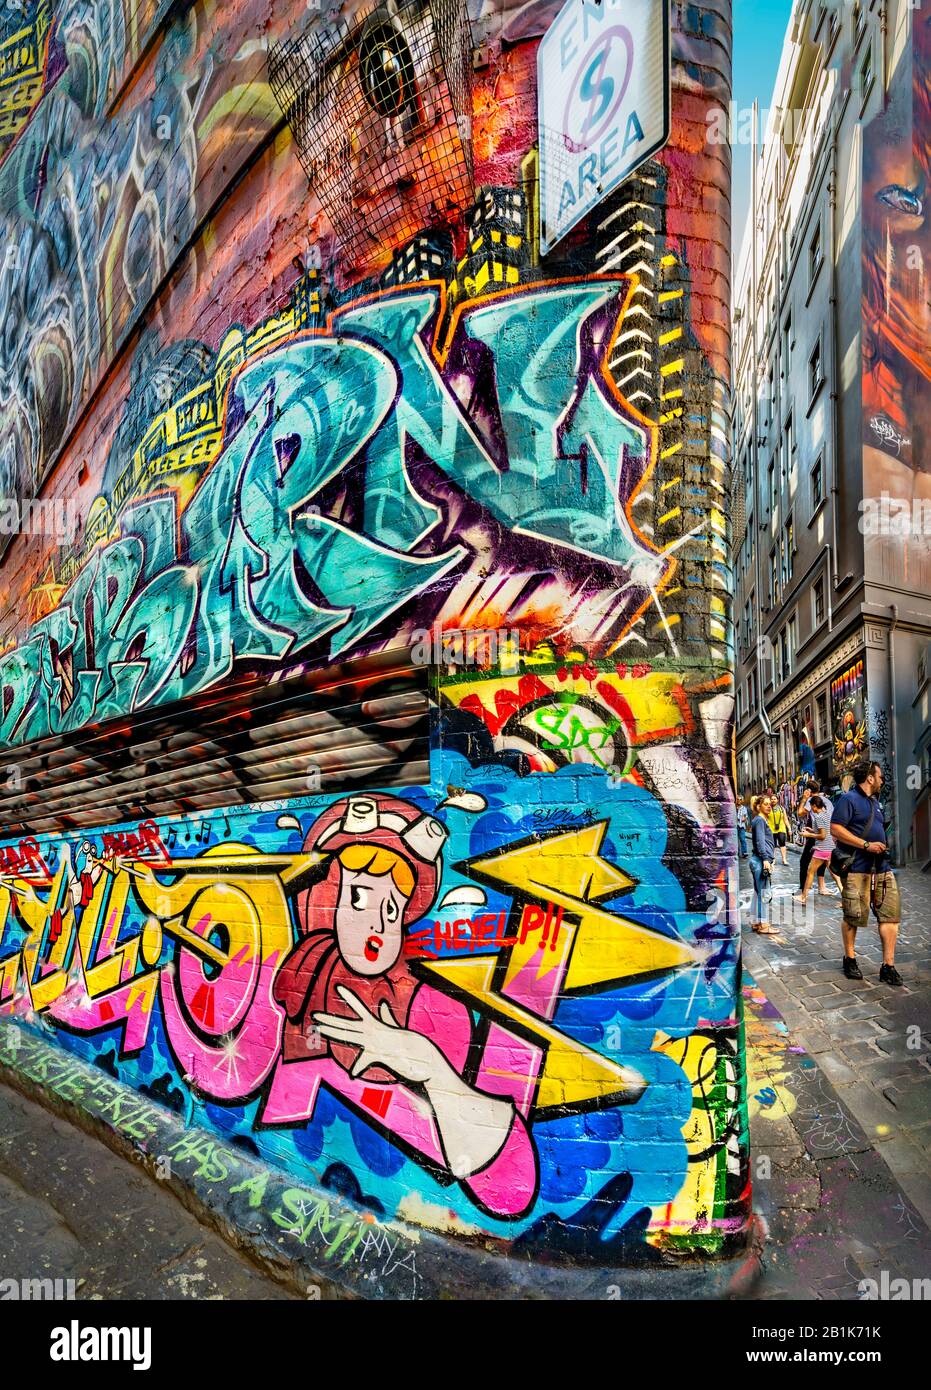 Cartoon style painting on heavily graffit wall down cobbled stone alley way, with people in background, Hosier Street, Melbourne Lanes, Melbourne, Vic Stock Photo